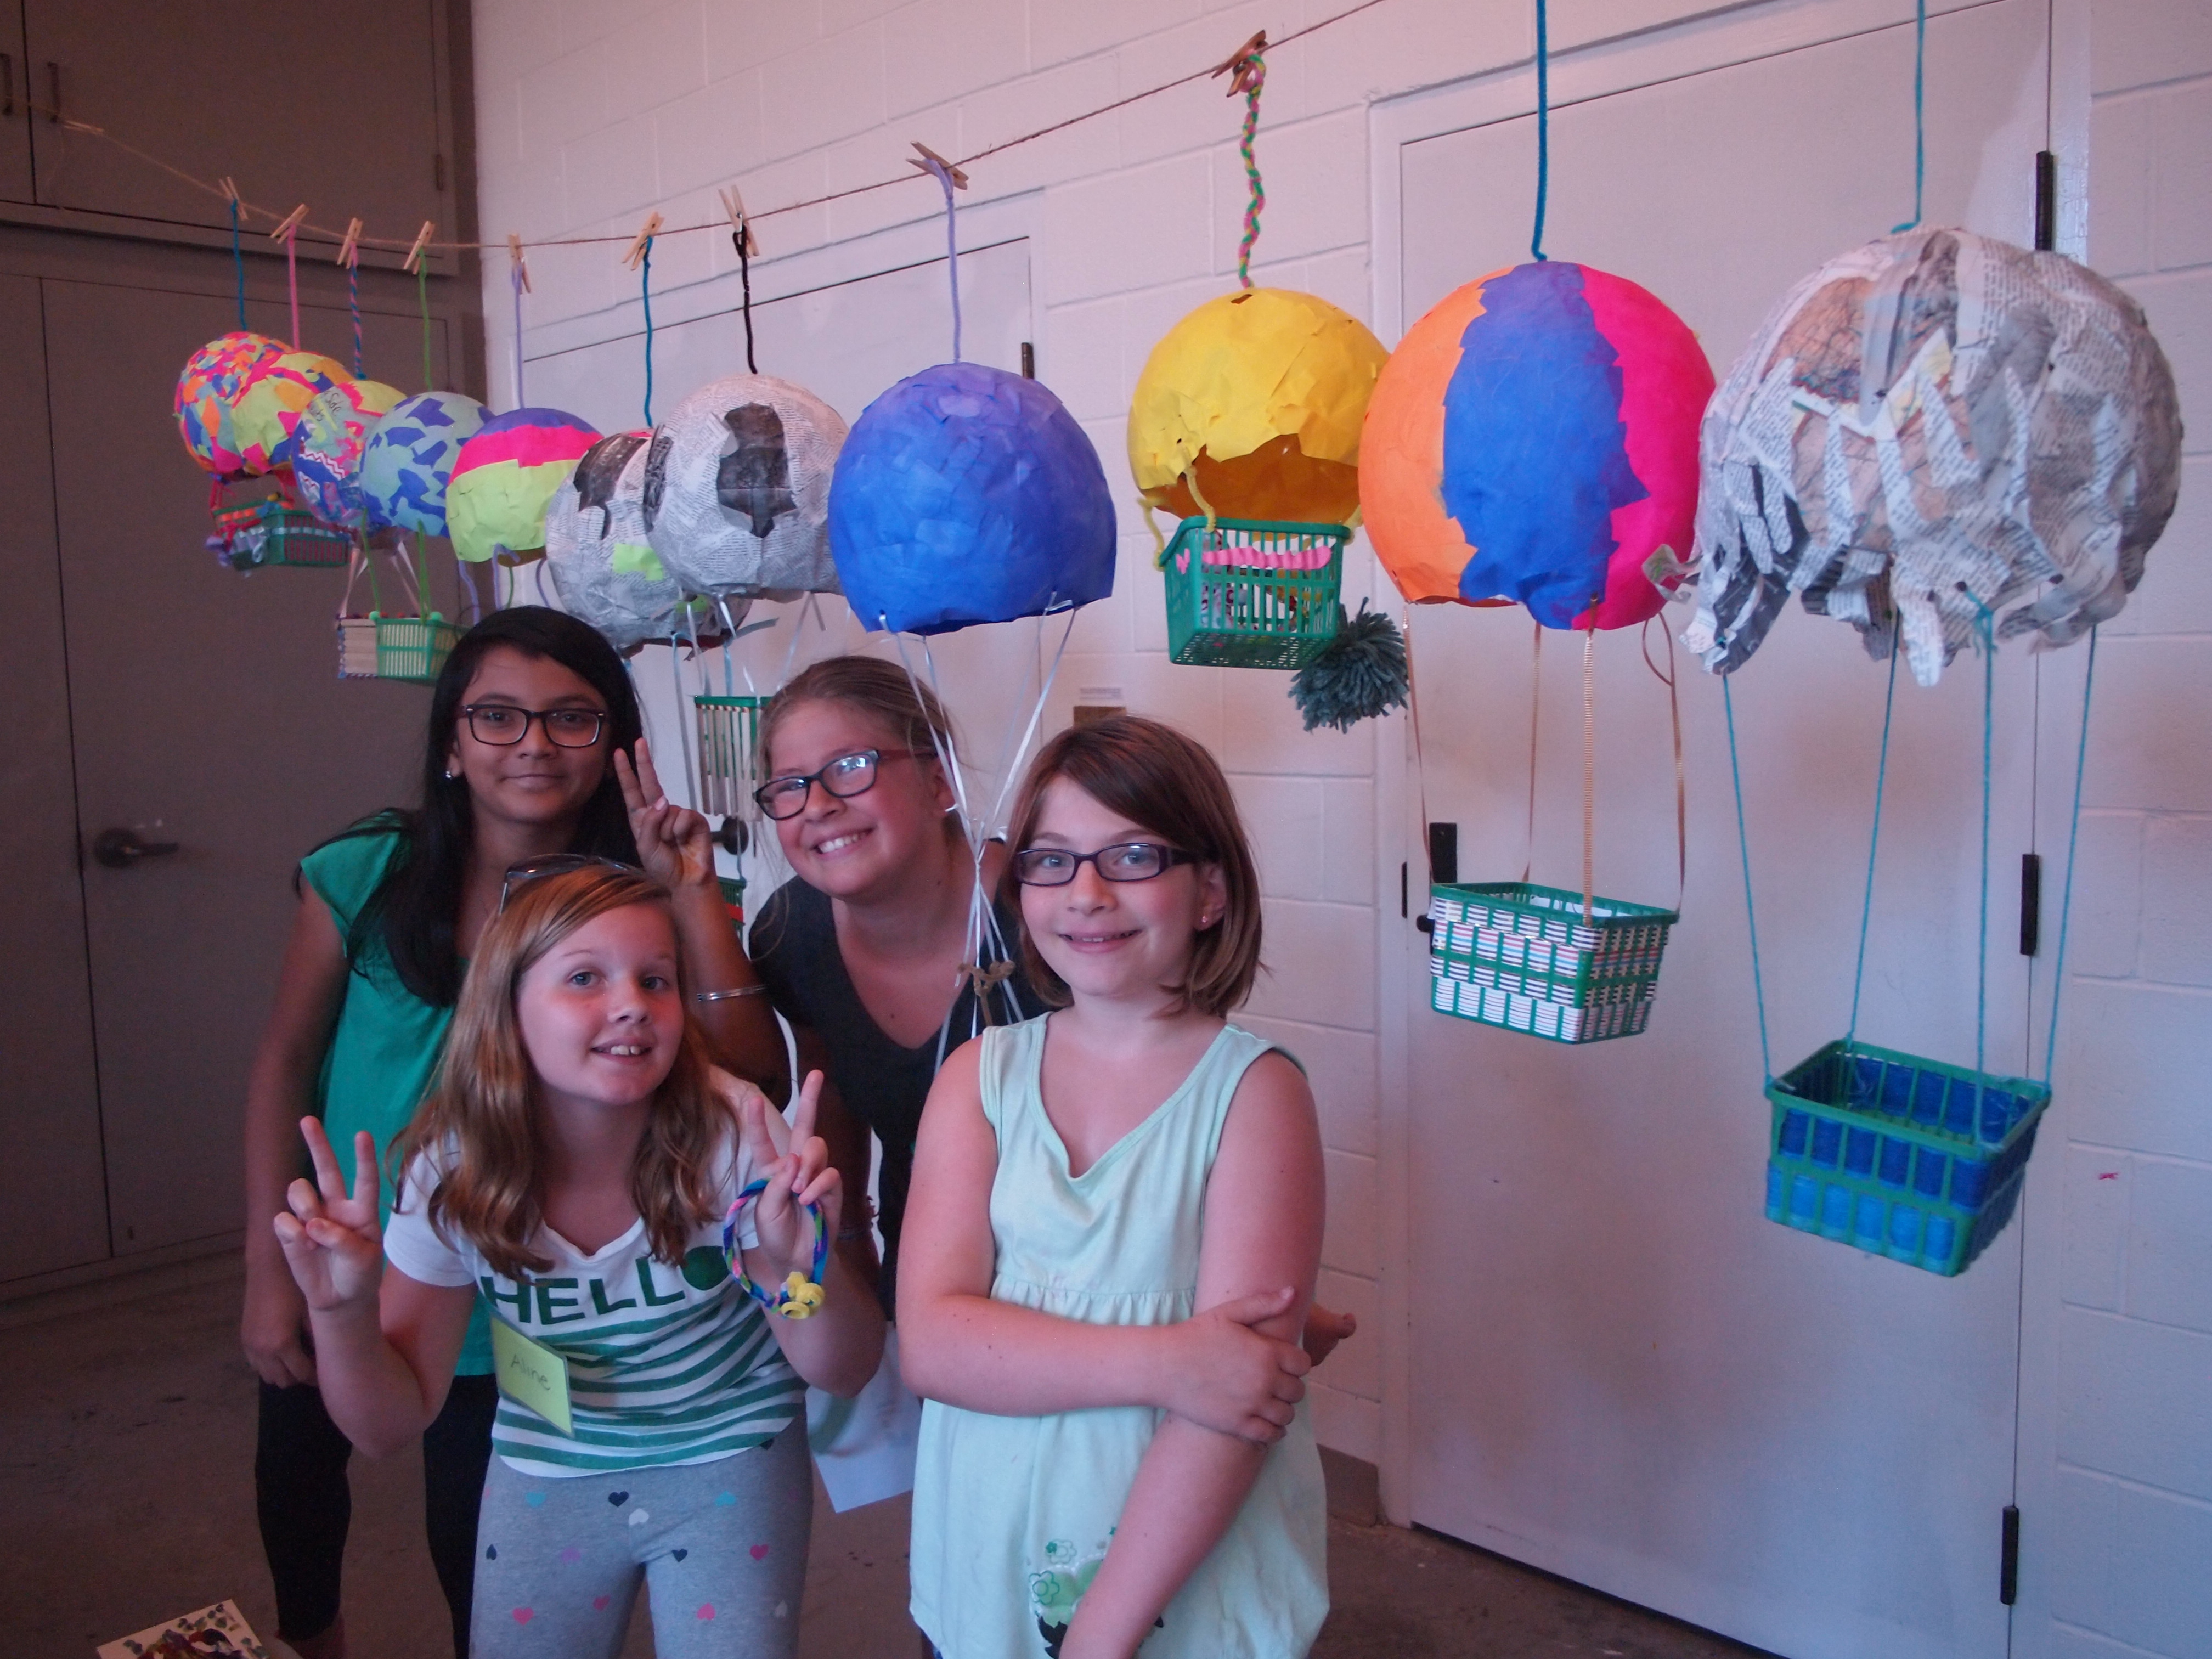 A group of four girls posing beneath a string hung with various brightly coloured hot air balloons made from paper and produce baskets